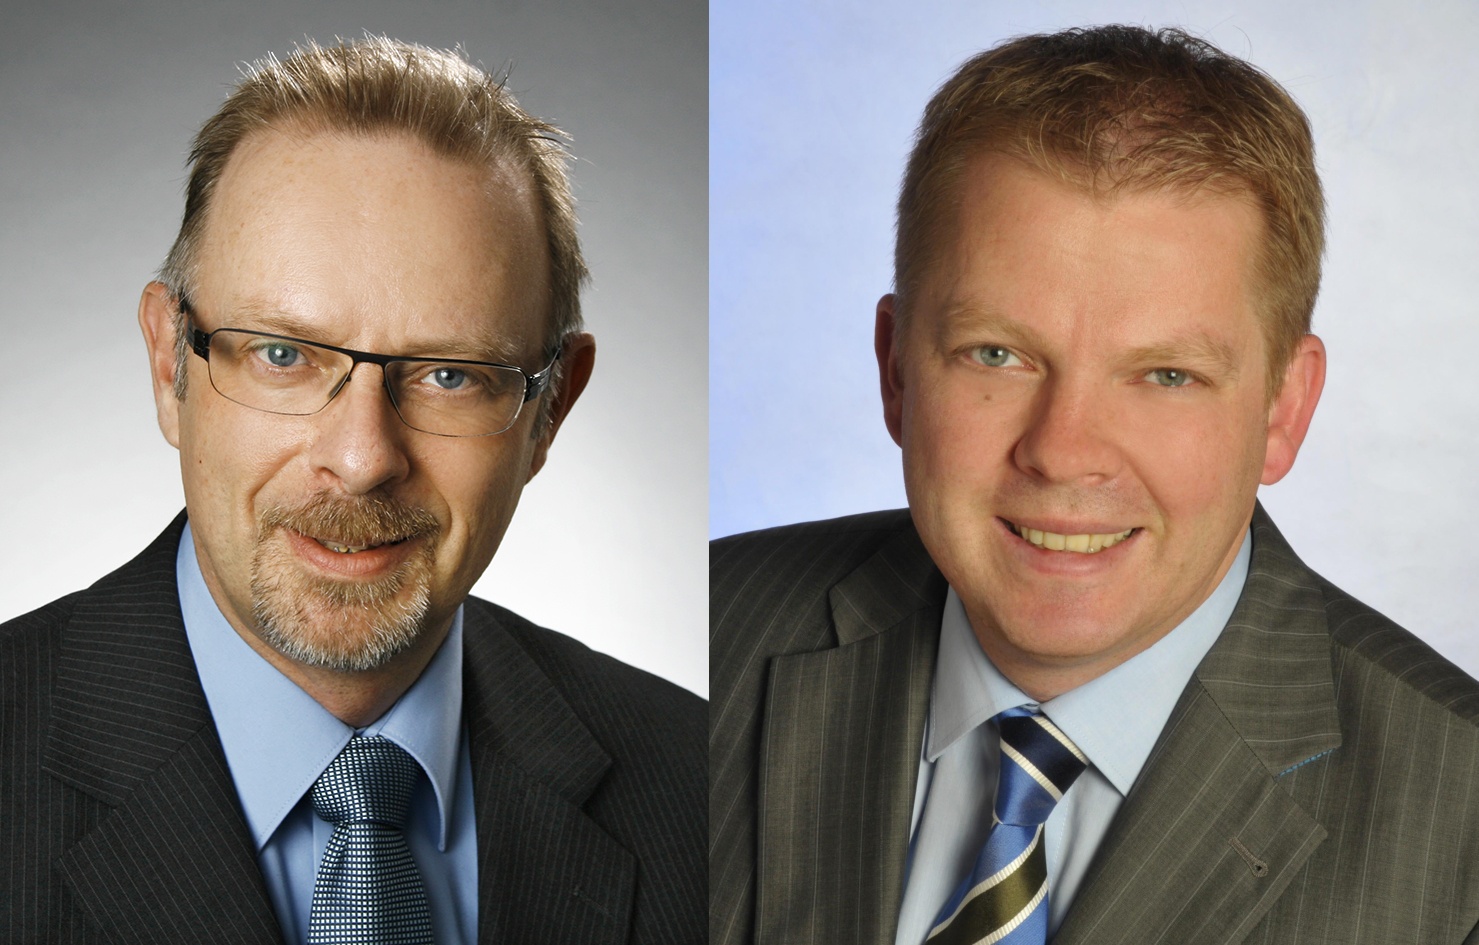 Two new employees at Hectronic